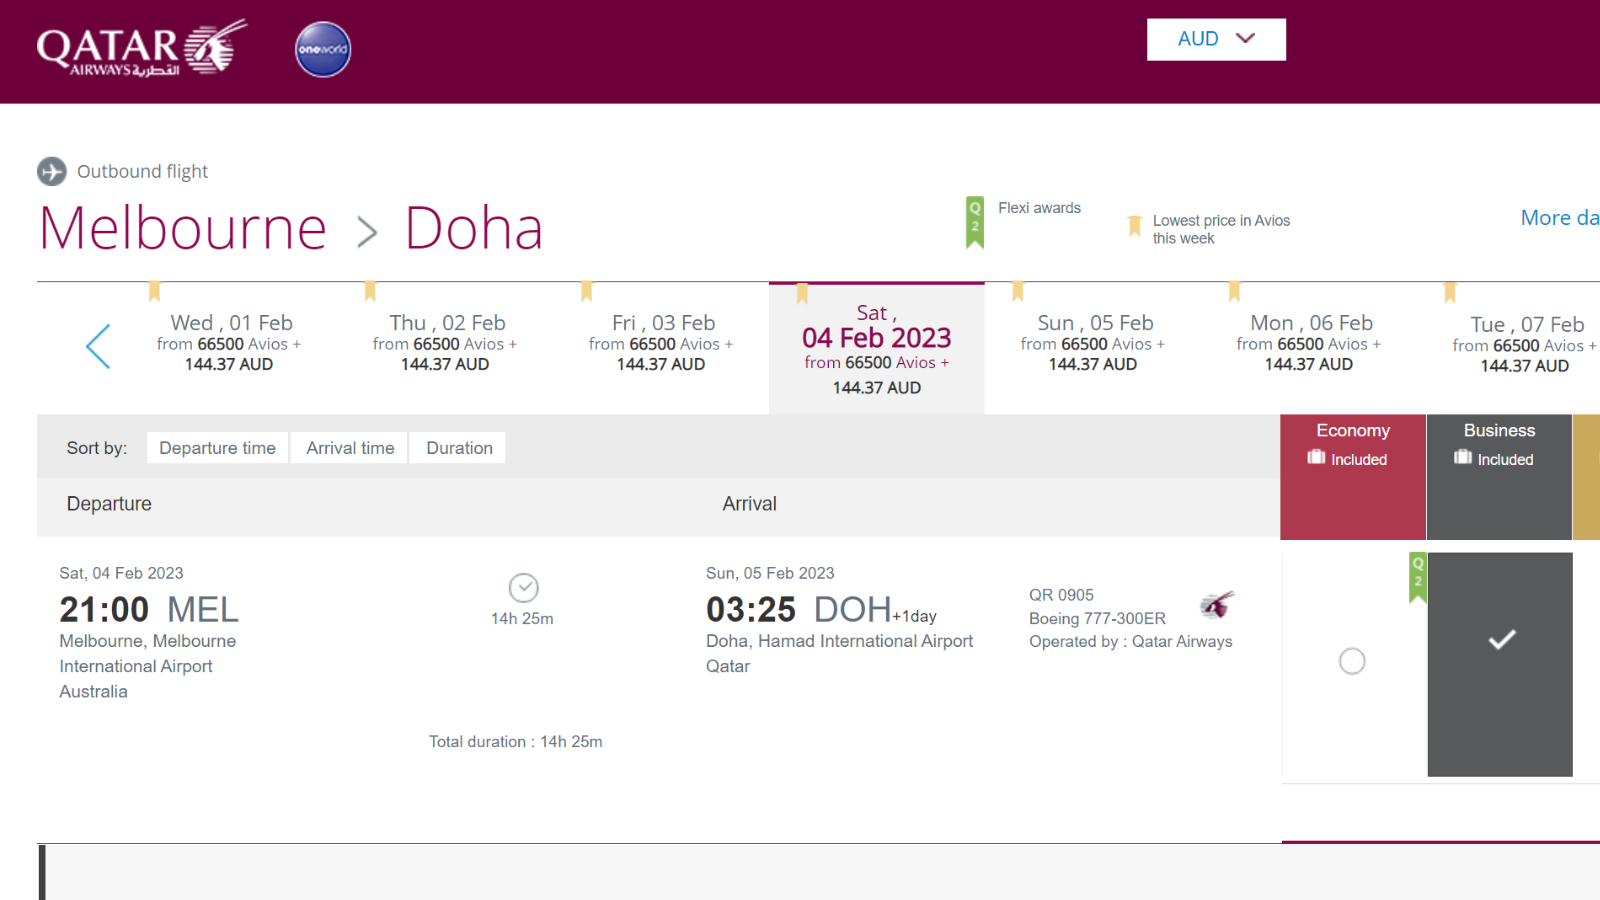 How to redeem points for travel on Qatar Airways from Australia